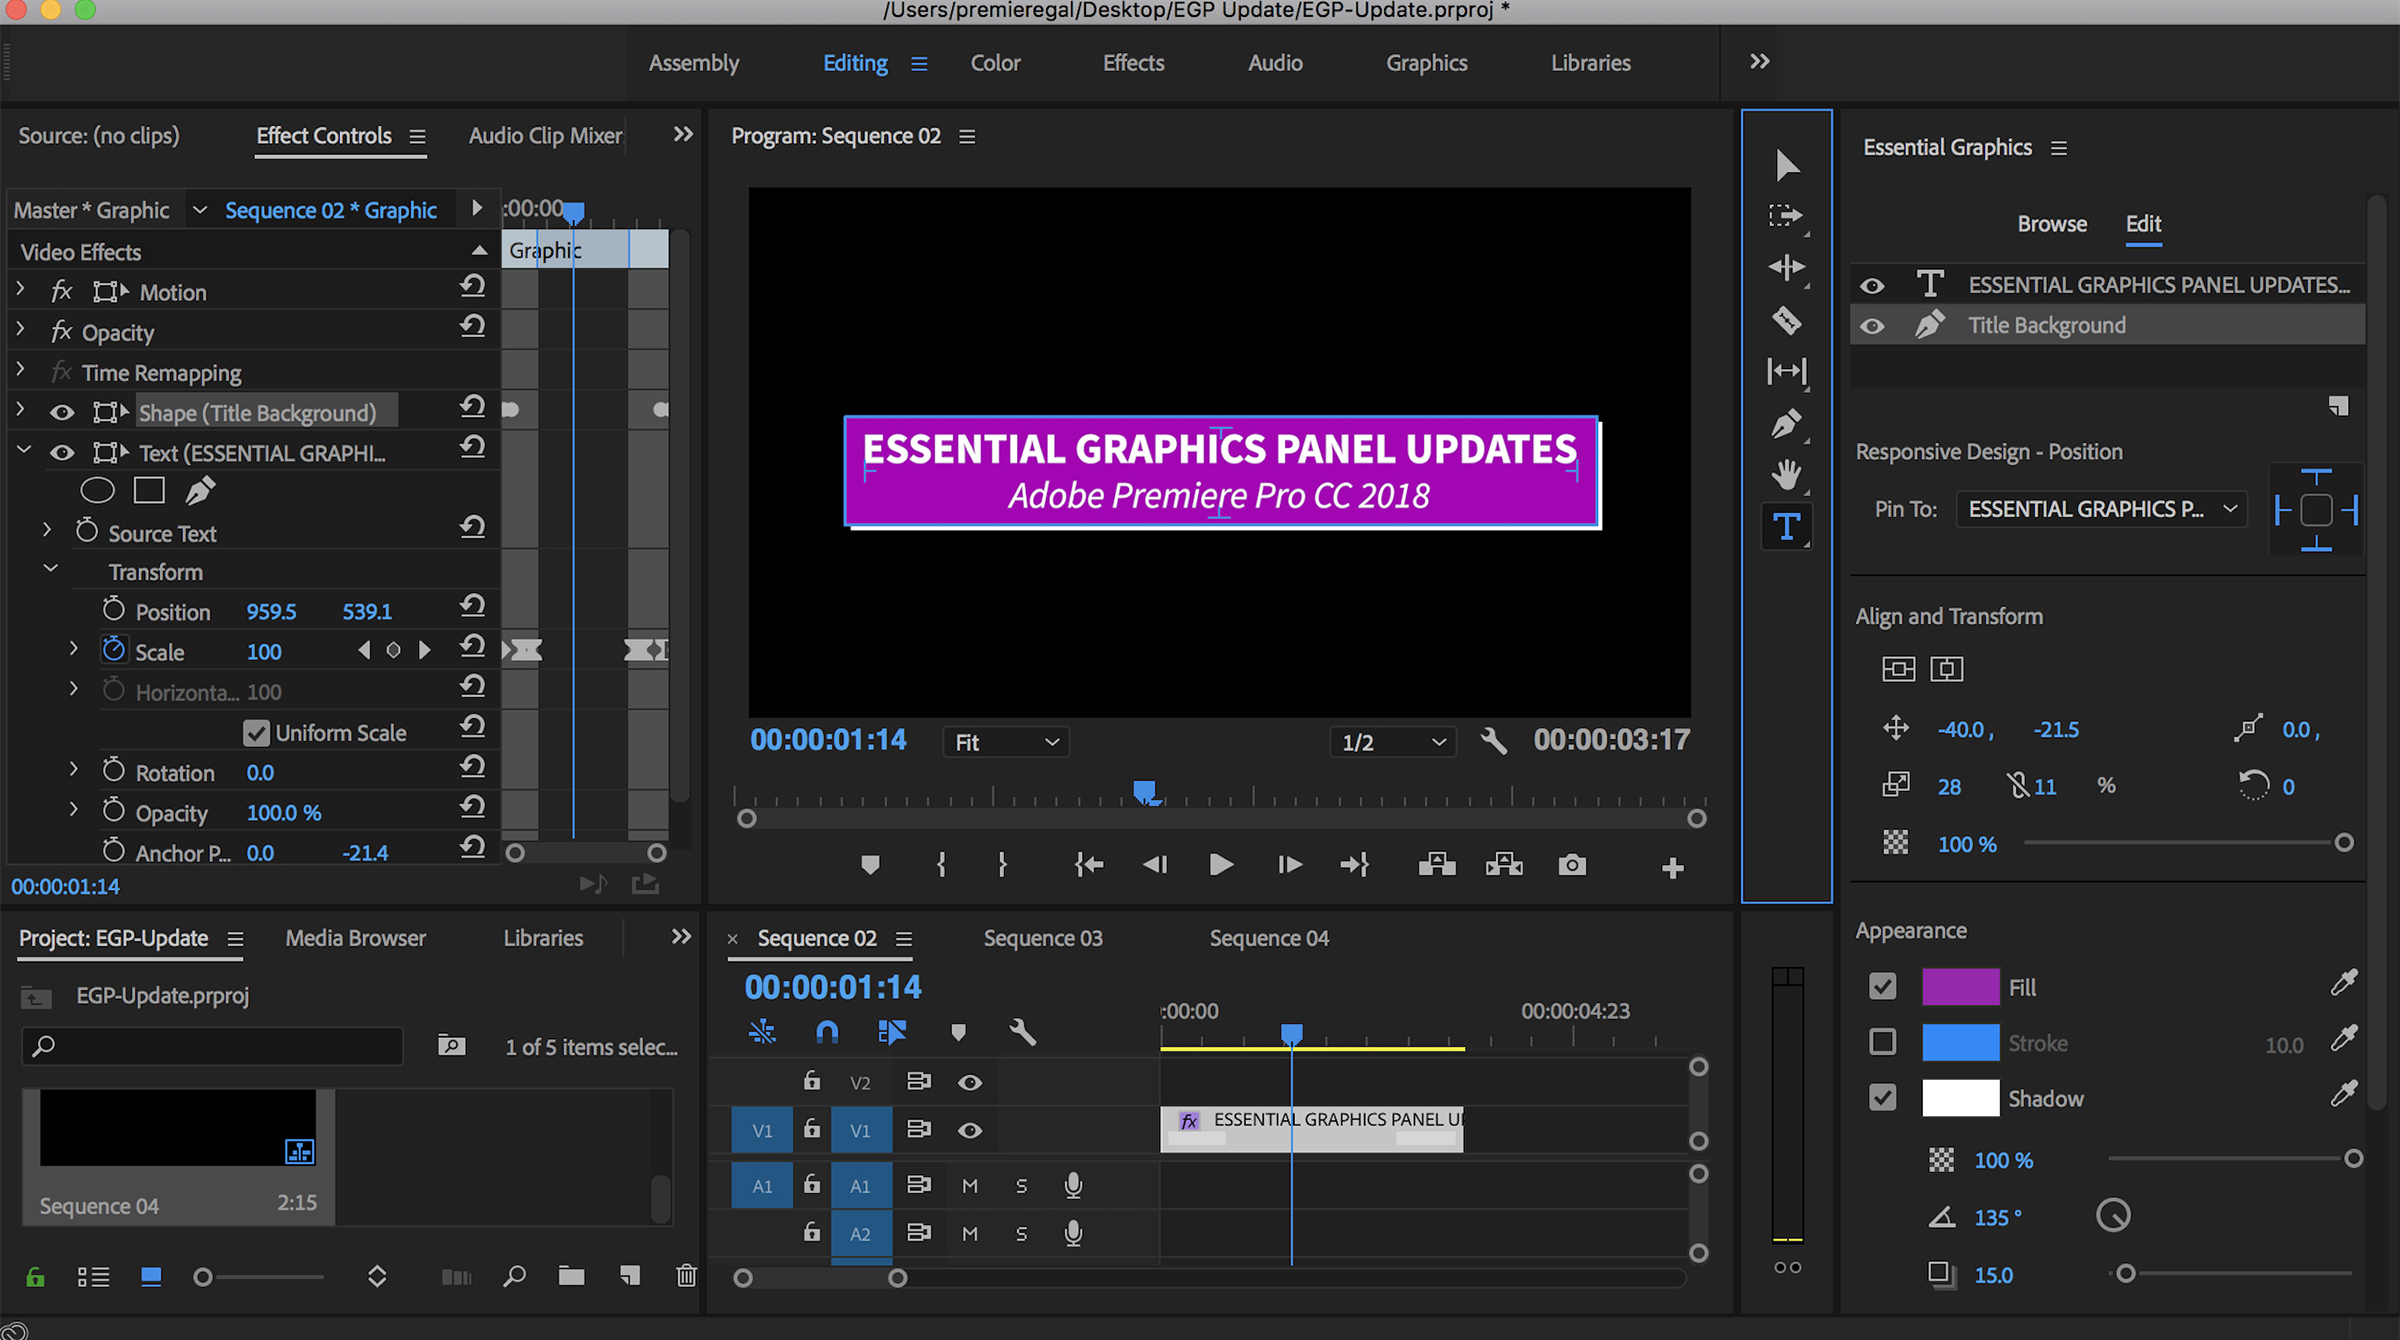 adobe after effects cc 2018 crack download